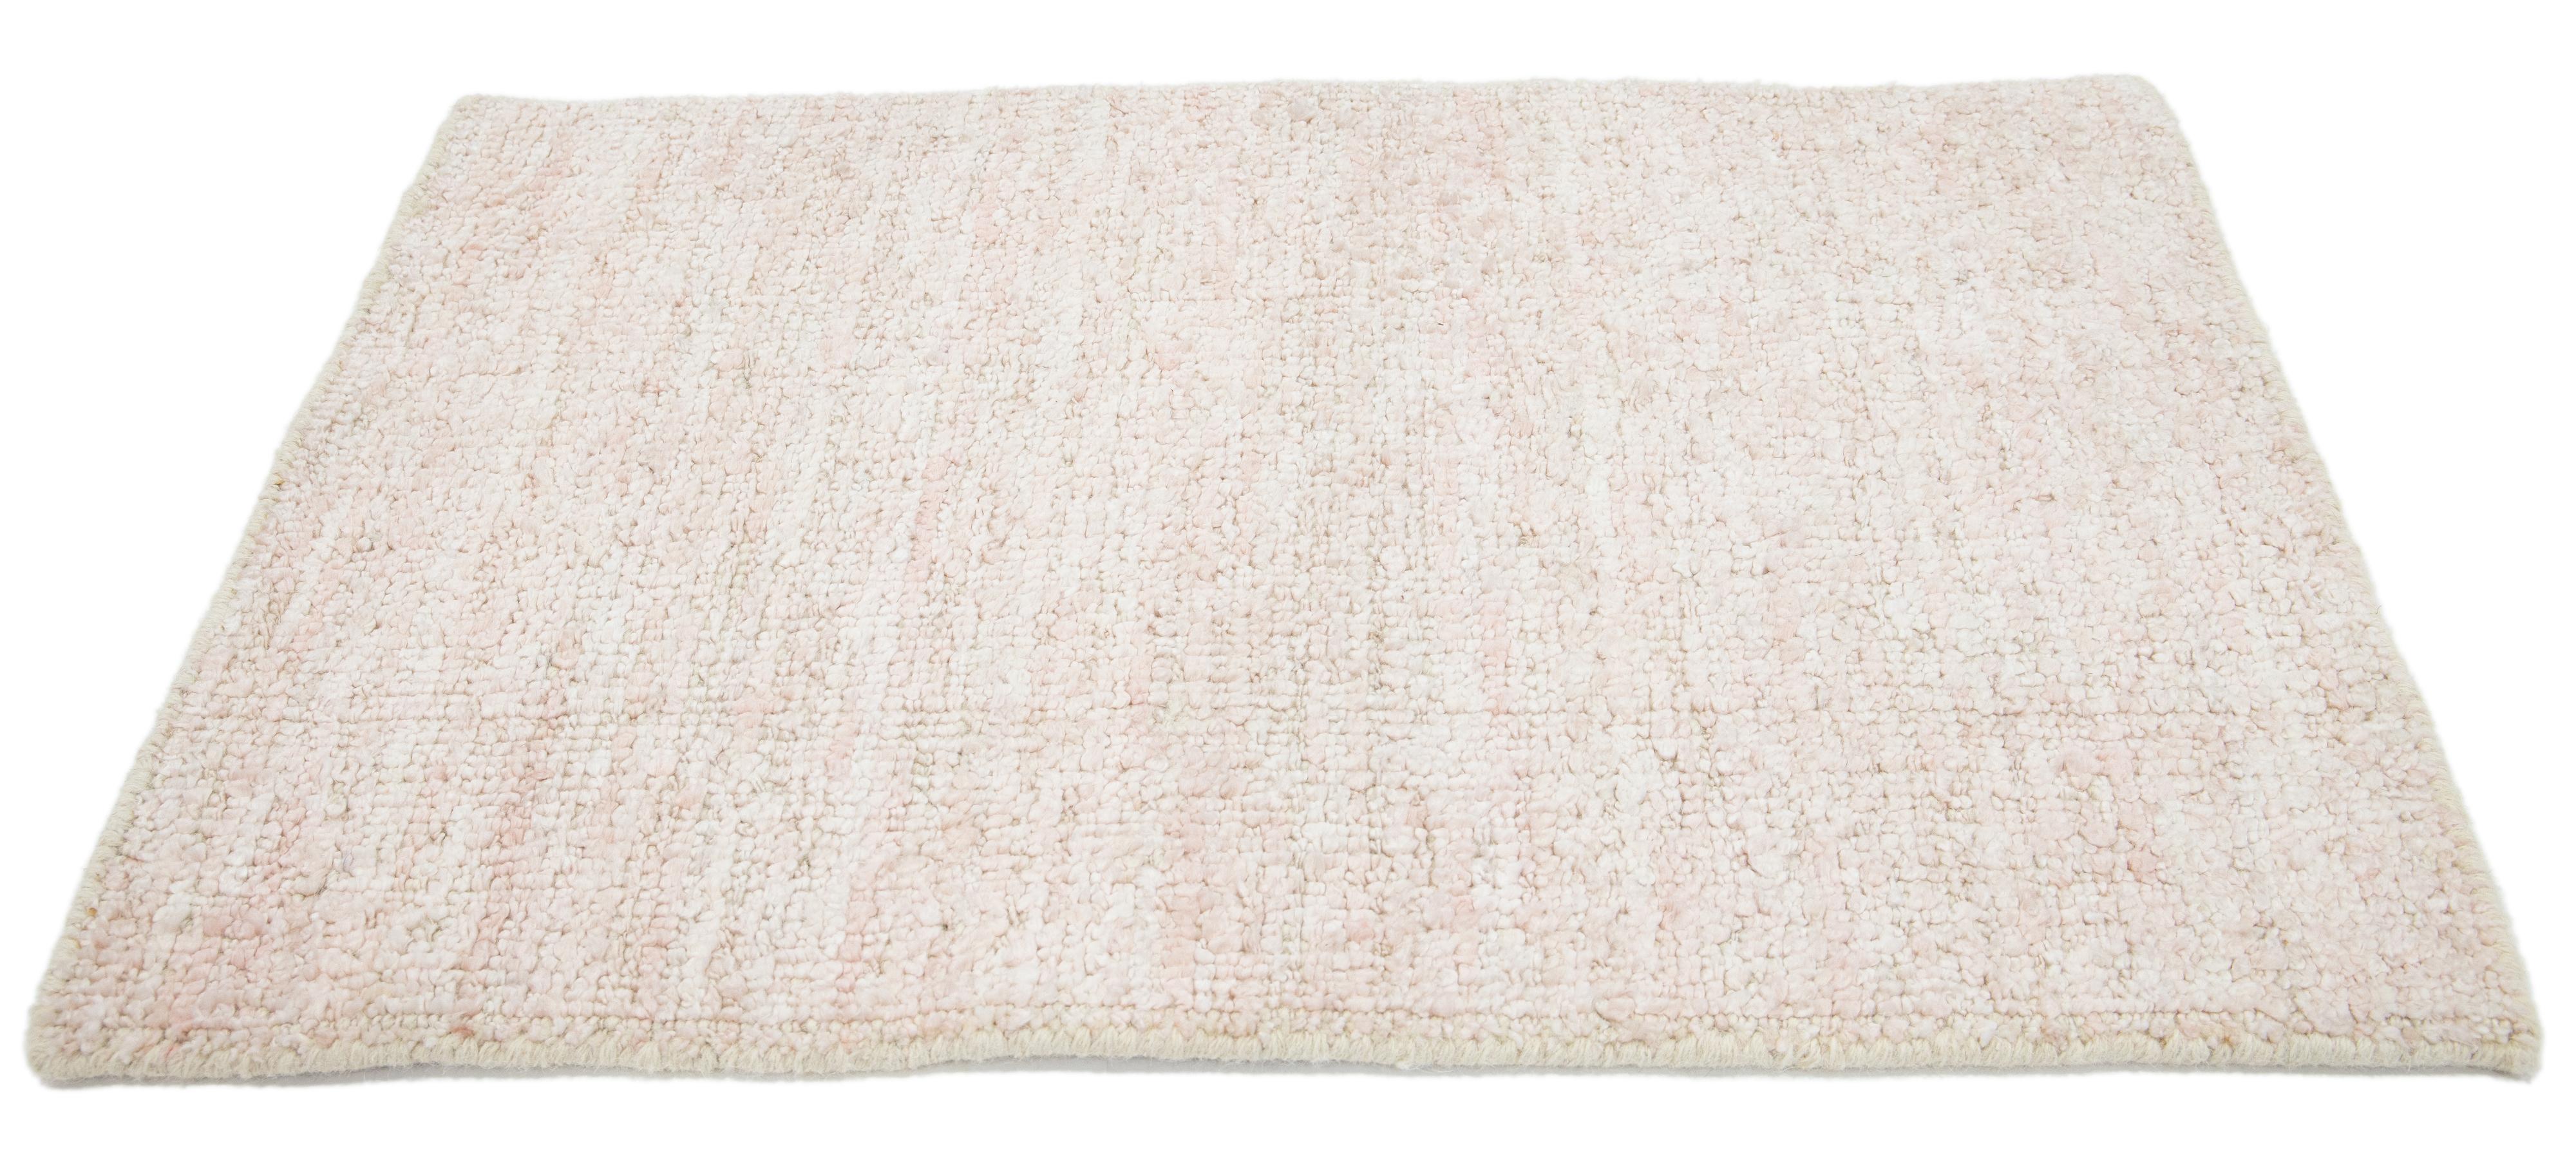 Apadana's Modern solid custom rug. Custom sizes and colors made-to-order. 

Material: 65% Viscose, 15% Wool, and 20% Cotton.
Techniques: Hand-Woven
Style: Solid-Modern
Lead time: Approx. 15-16 wks available 
Colors: As shown, other custom